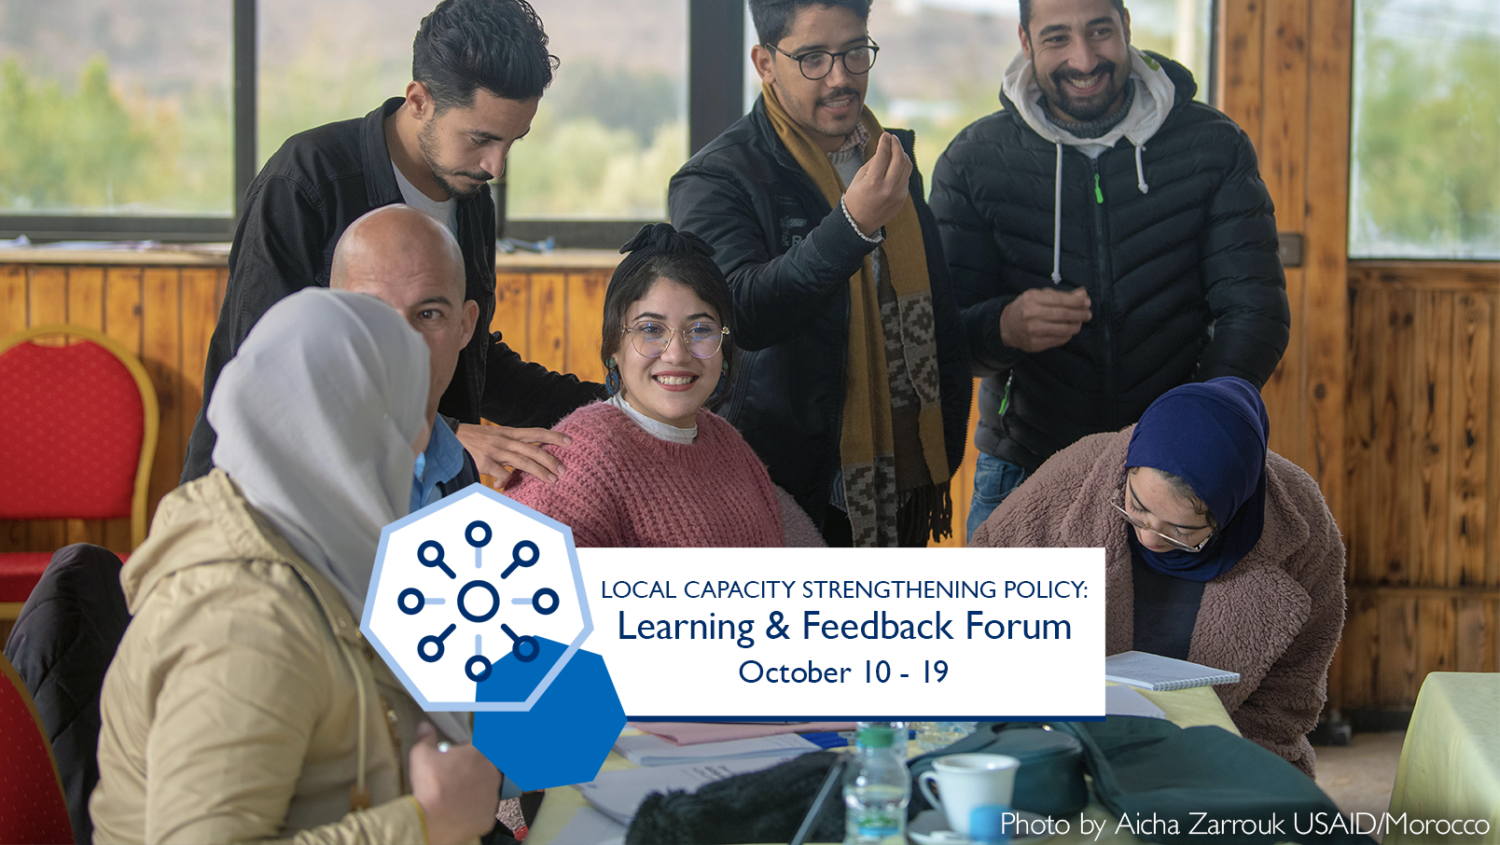 Local Capacity Strengthening Policy, Learning & Feedback Forum, October 10-19